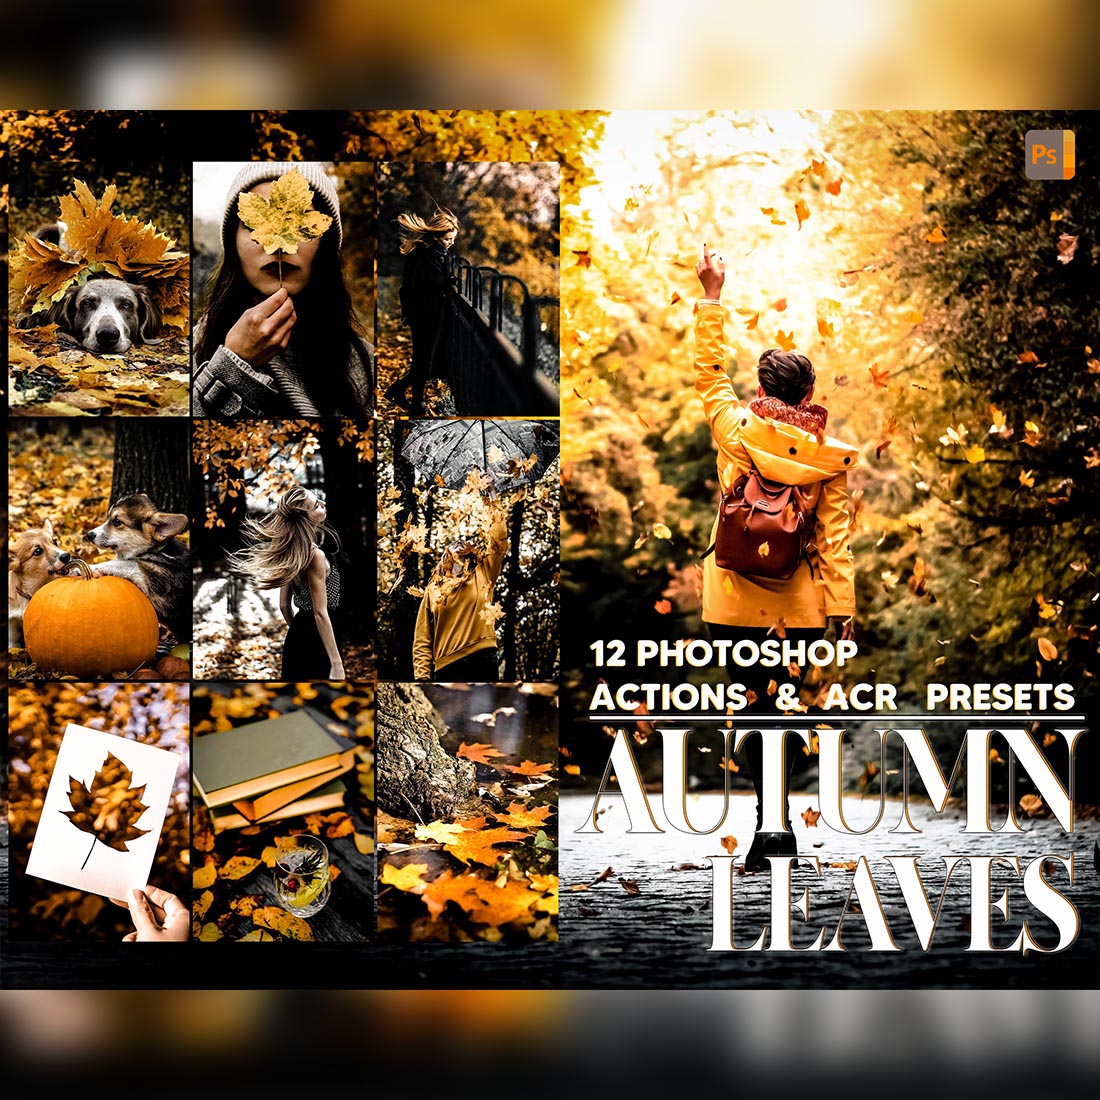 12 Photoshop Actions, Autumn Leaves Ps Action, Fall ACR Preset, Pumpkin Ps Filter, Atn Portrait And Lifestyle Theme For Instagram, Blogger cover image.